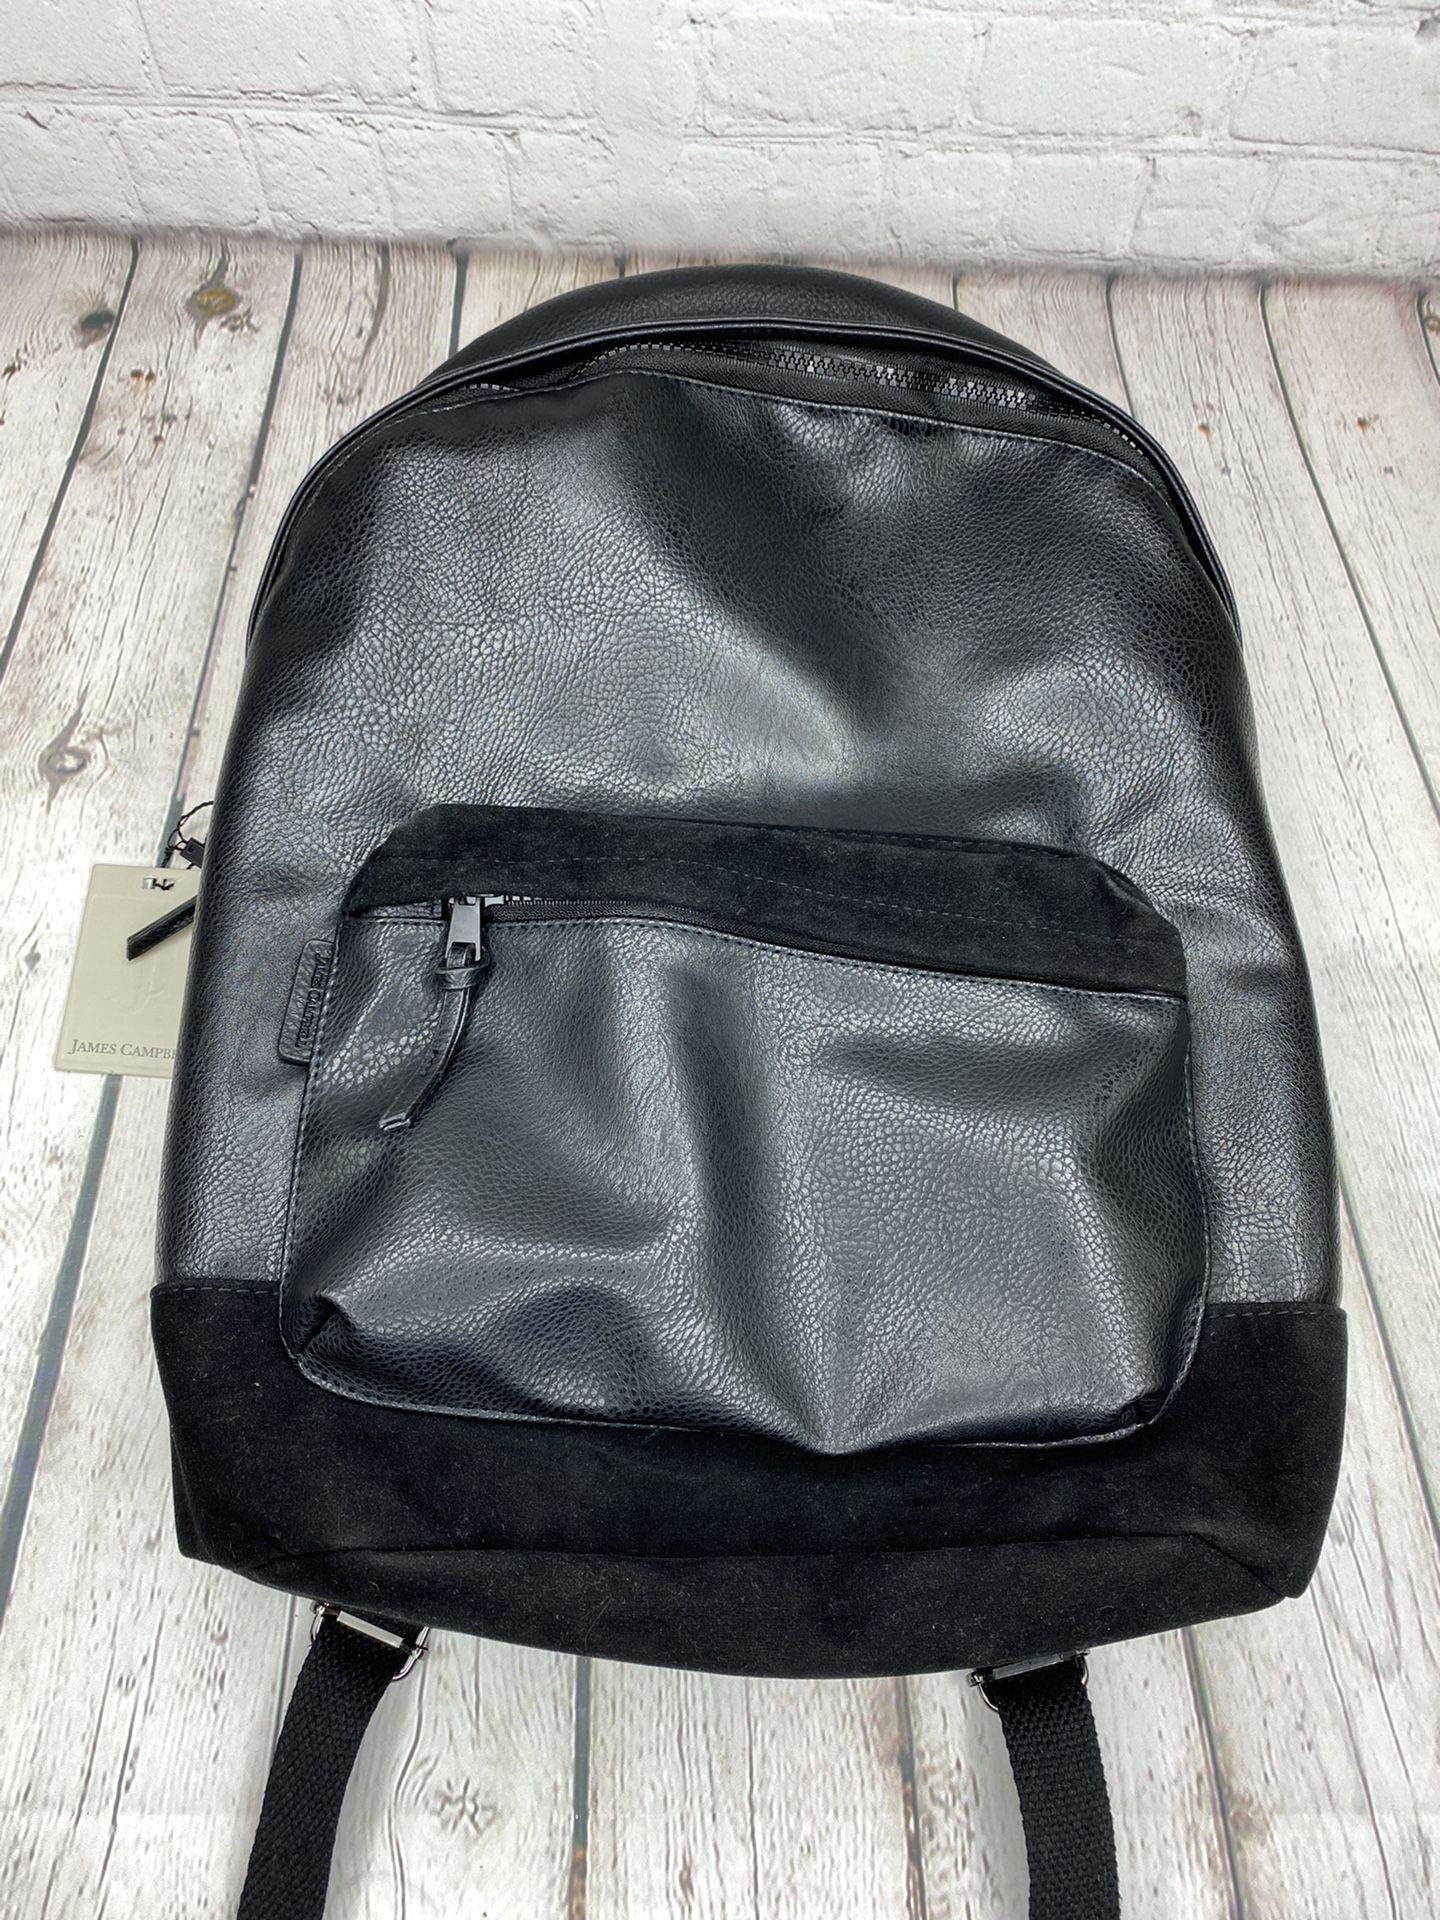 New James Campbell Faux Black Leather Backpack $158 MSRP